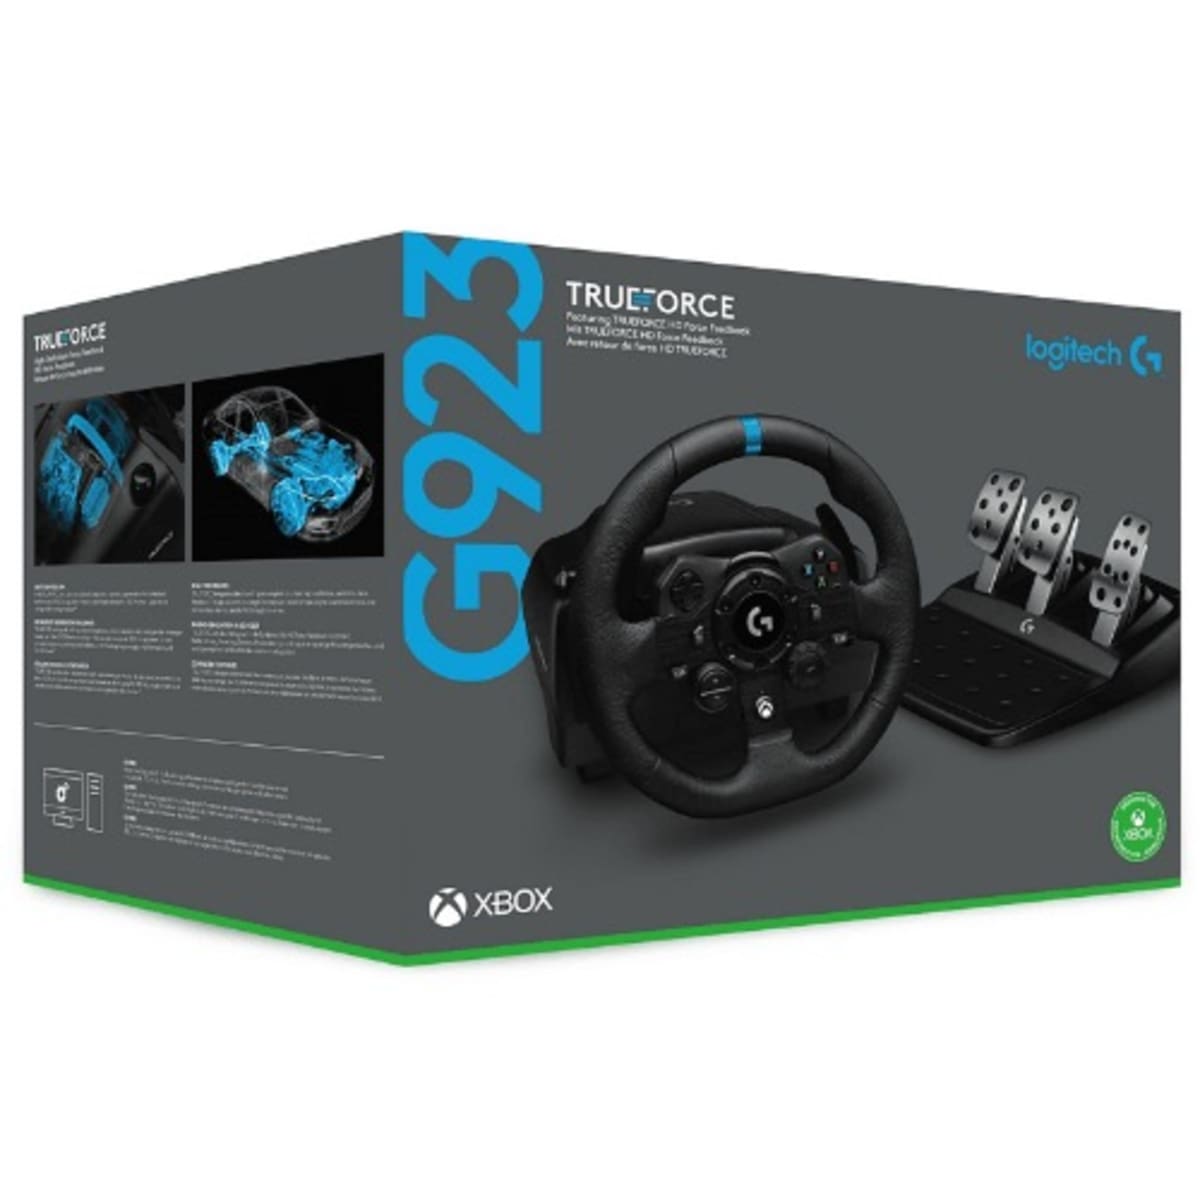 Logitech G923 Racing Wheel and Pedals For PC, Xbox X, Xbox One with  Accessories